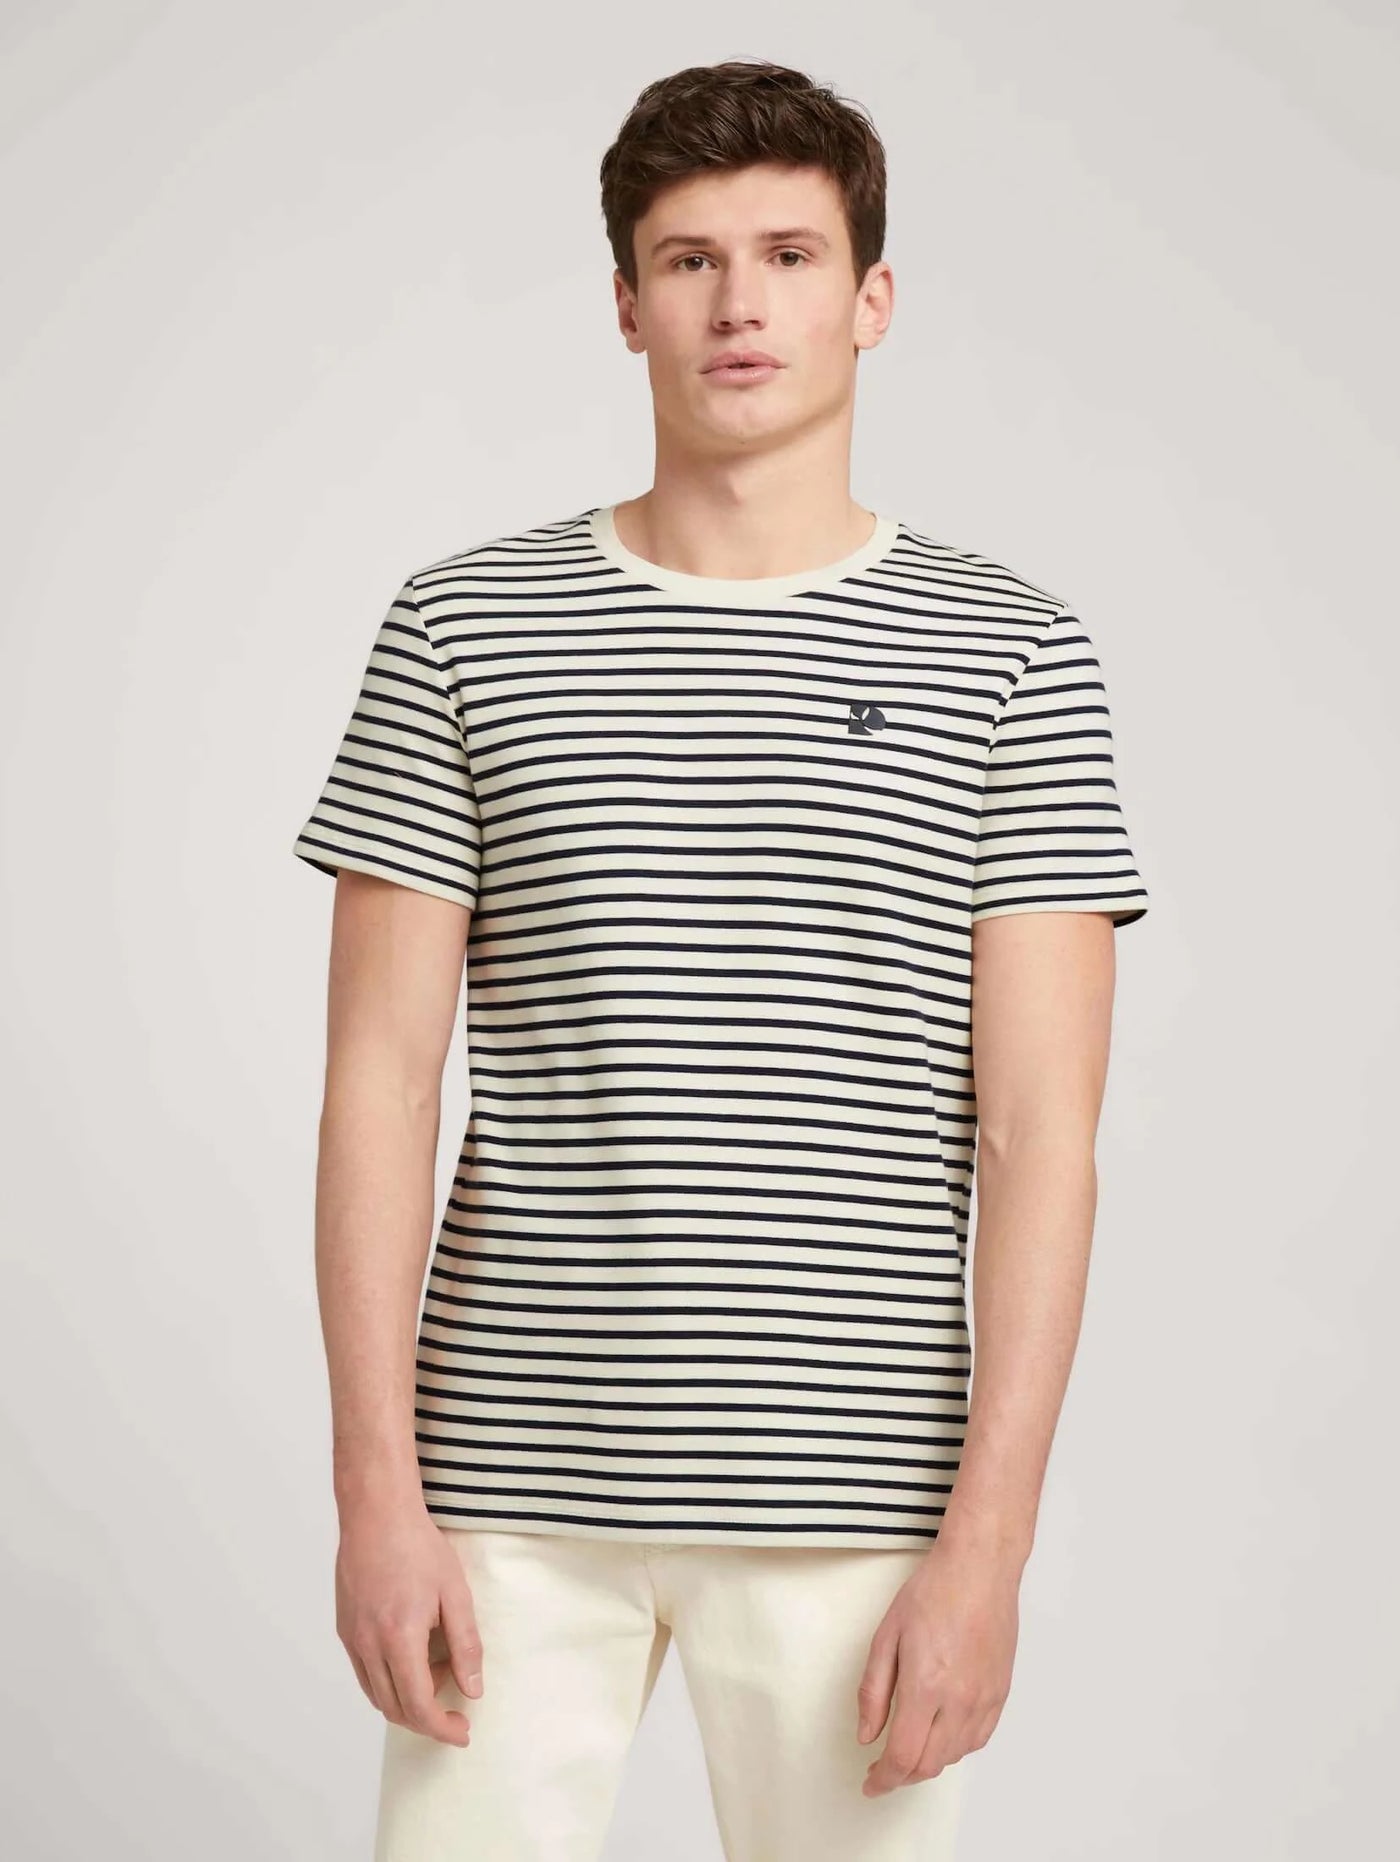 MBRC@TOMTAILOR - MEN STRIPED T-SHIRT - FRONTAL VIEW